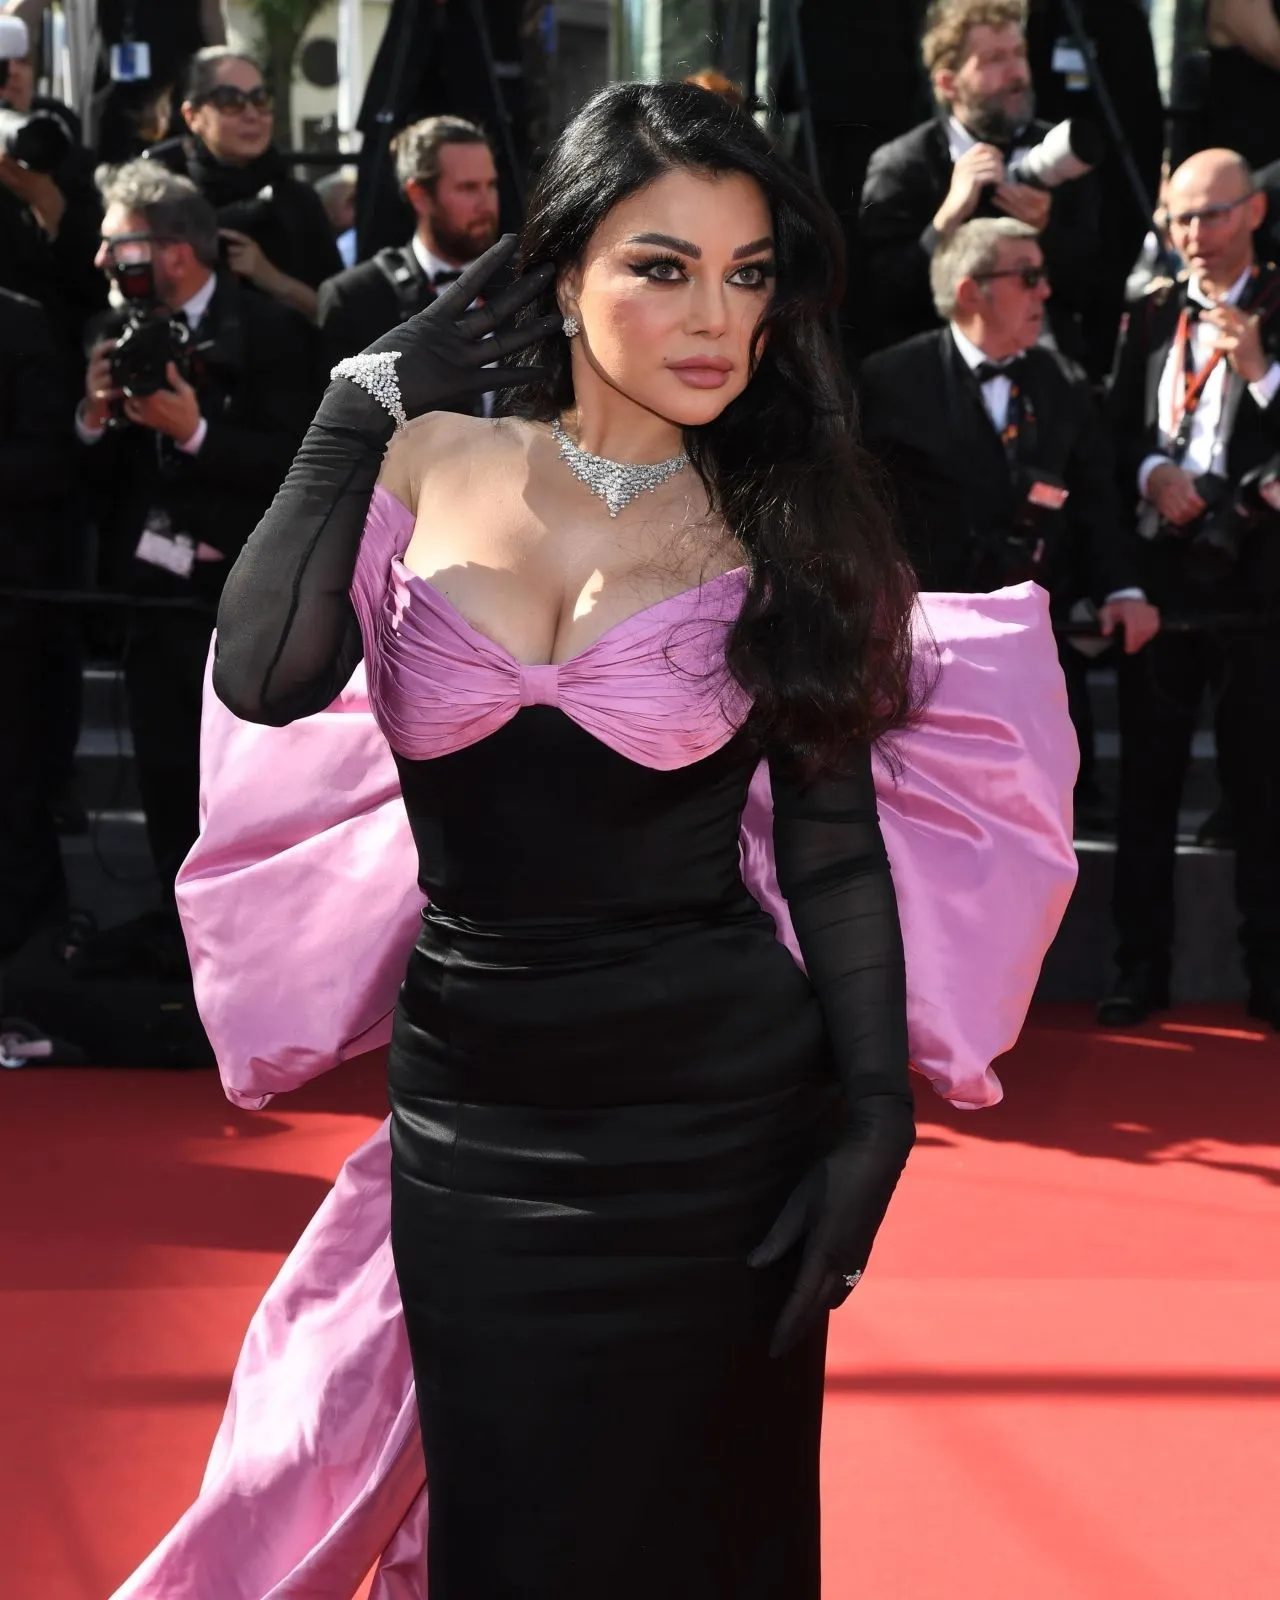 HAIFA WEHBE AT THE COUNT OF MONTE CRISTO PREMIERE AT CANNES FILM FESTIVAL